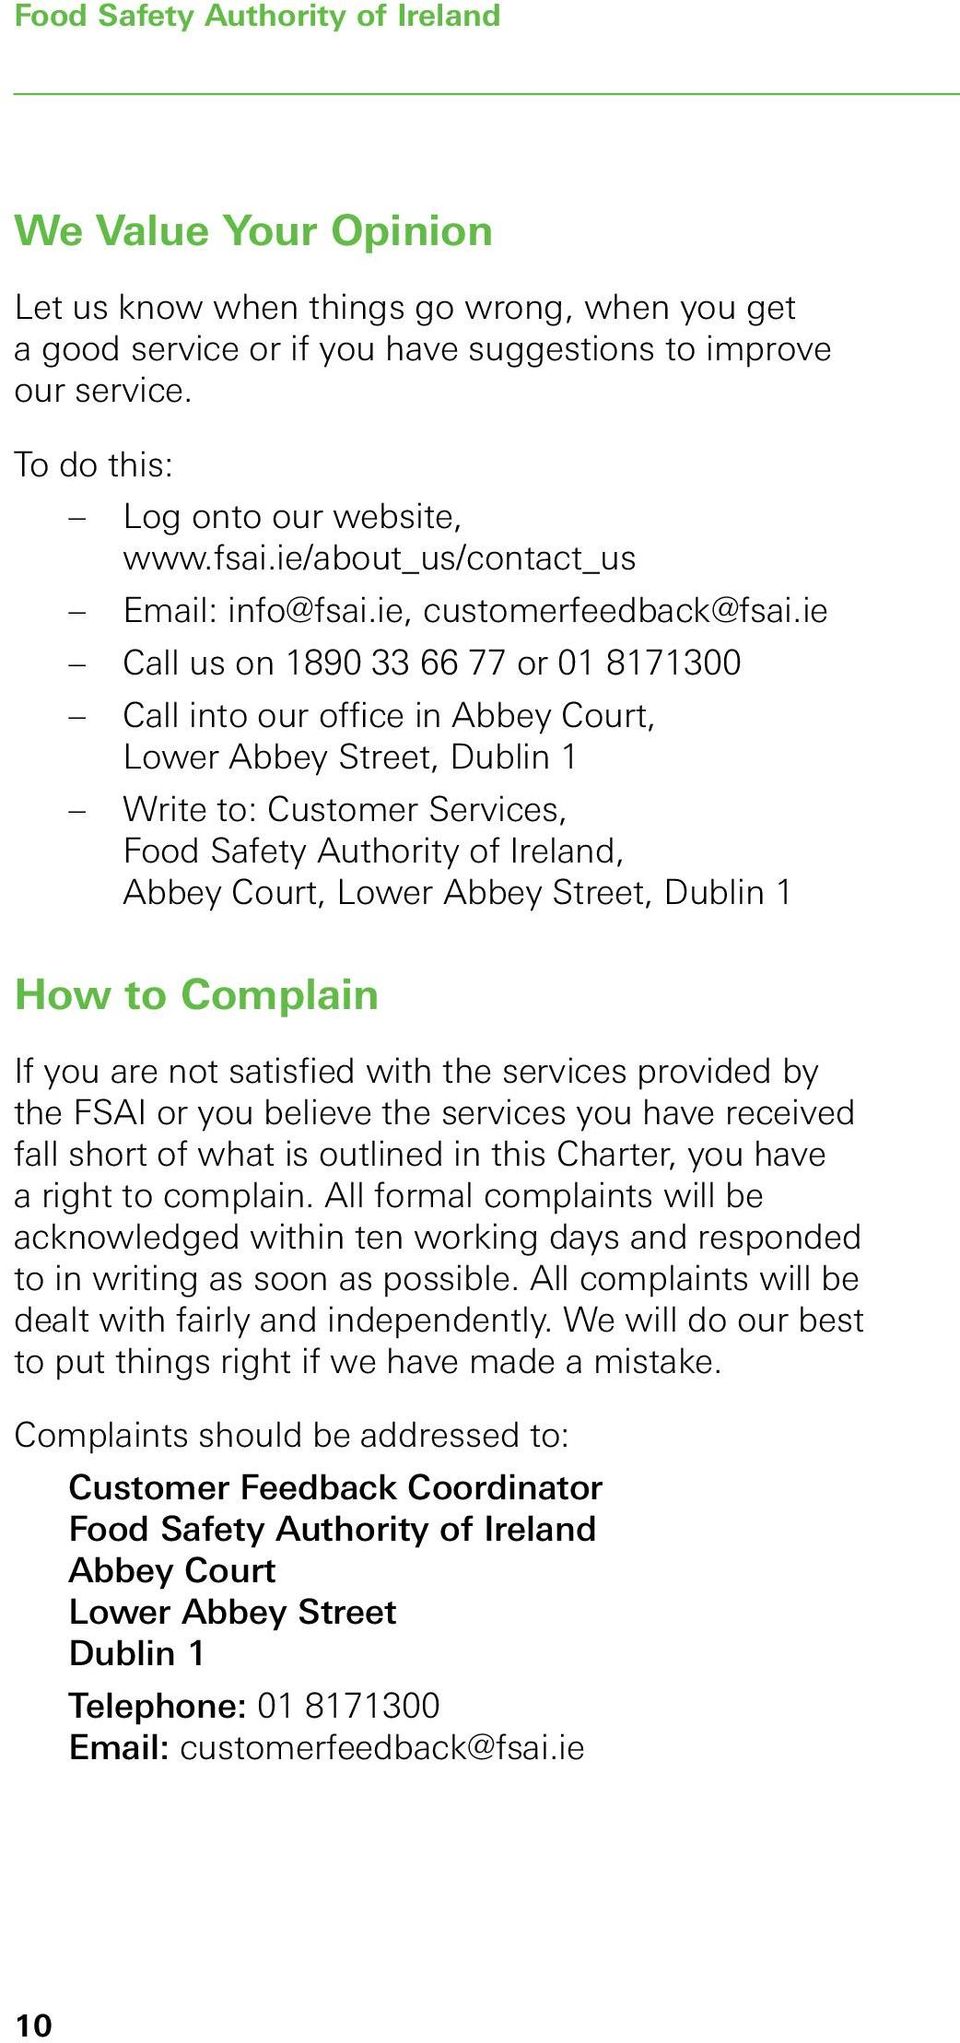 ie Call us on 1890 33 66 77 or 01 8171300 Call into our office in Abbey Court, Lower Abbey Street, Dublin 1 Write to: Customer Services, Food Safety Authority of Ireland, Abbey Court, Lower Abbey